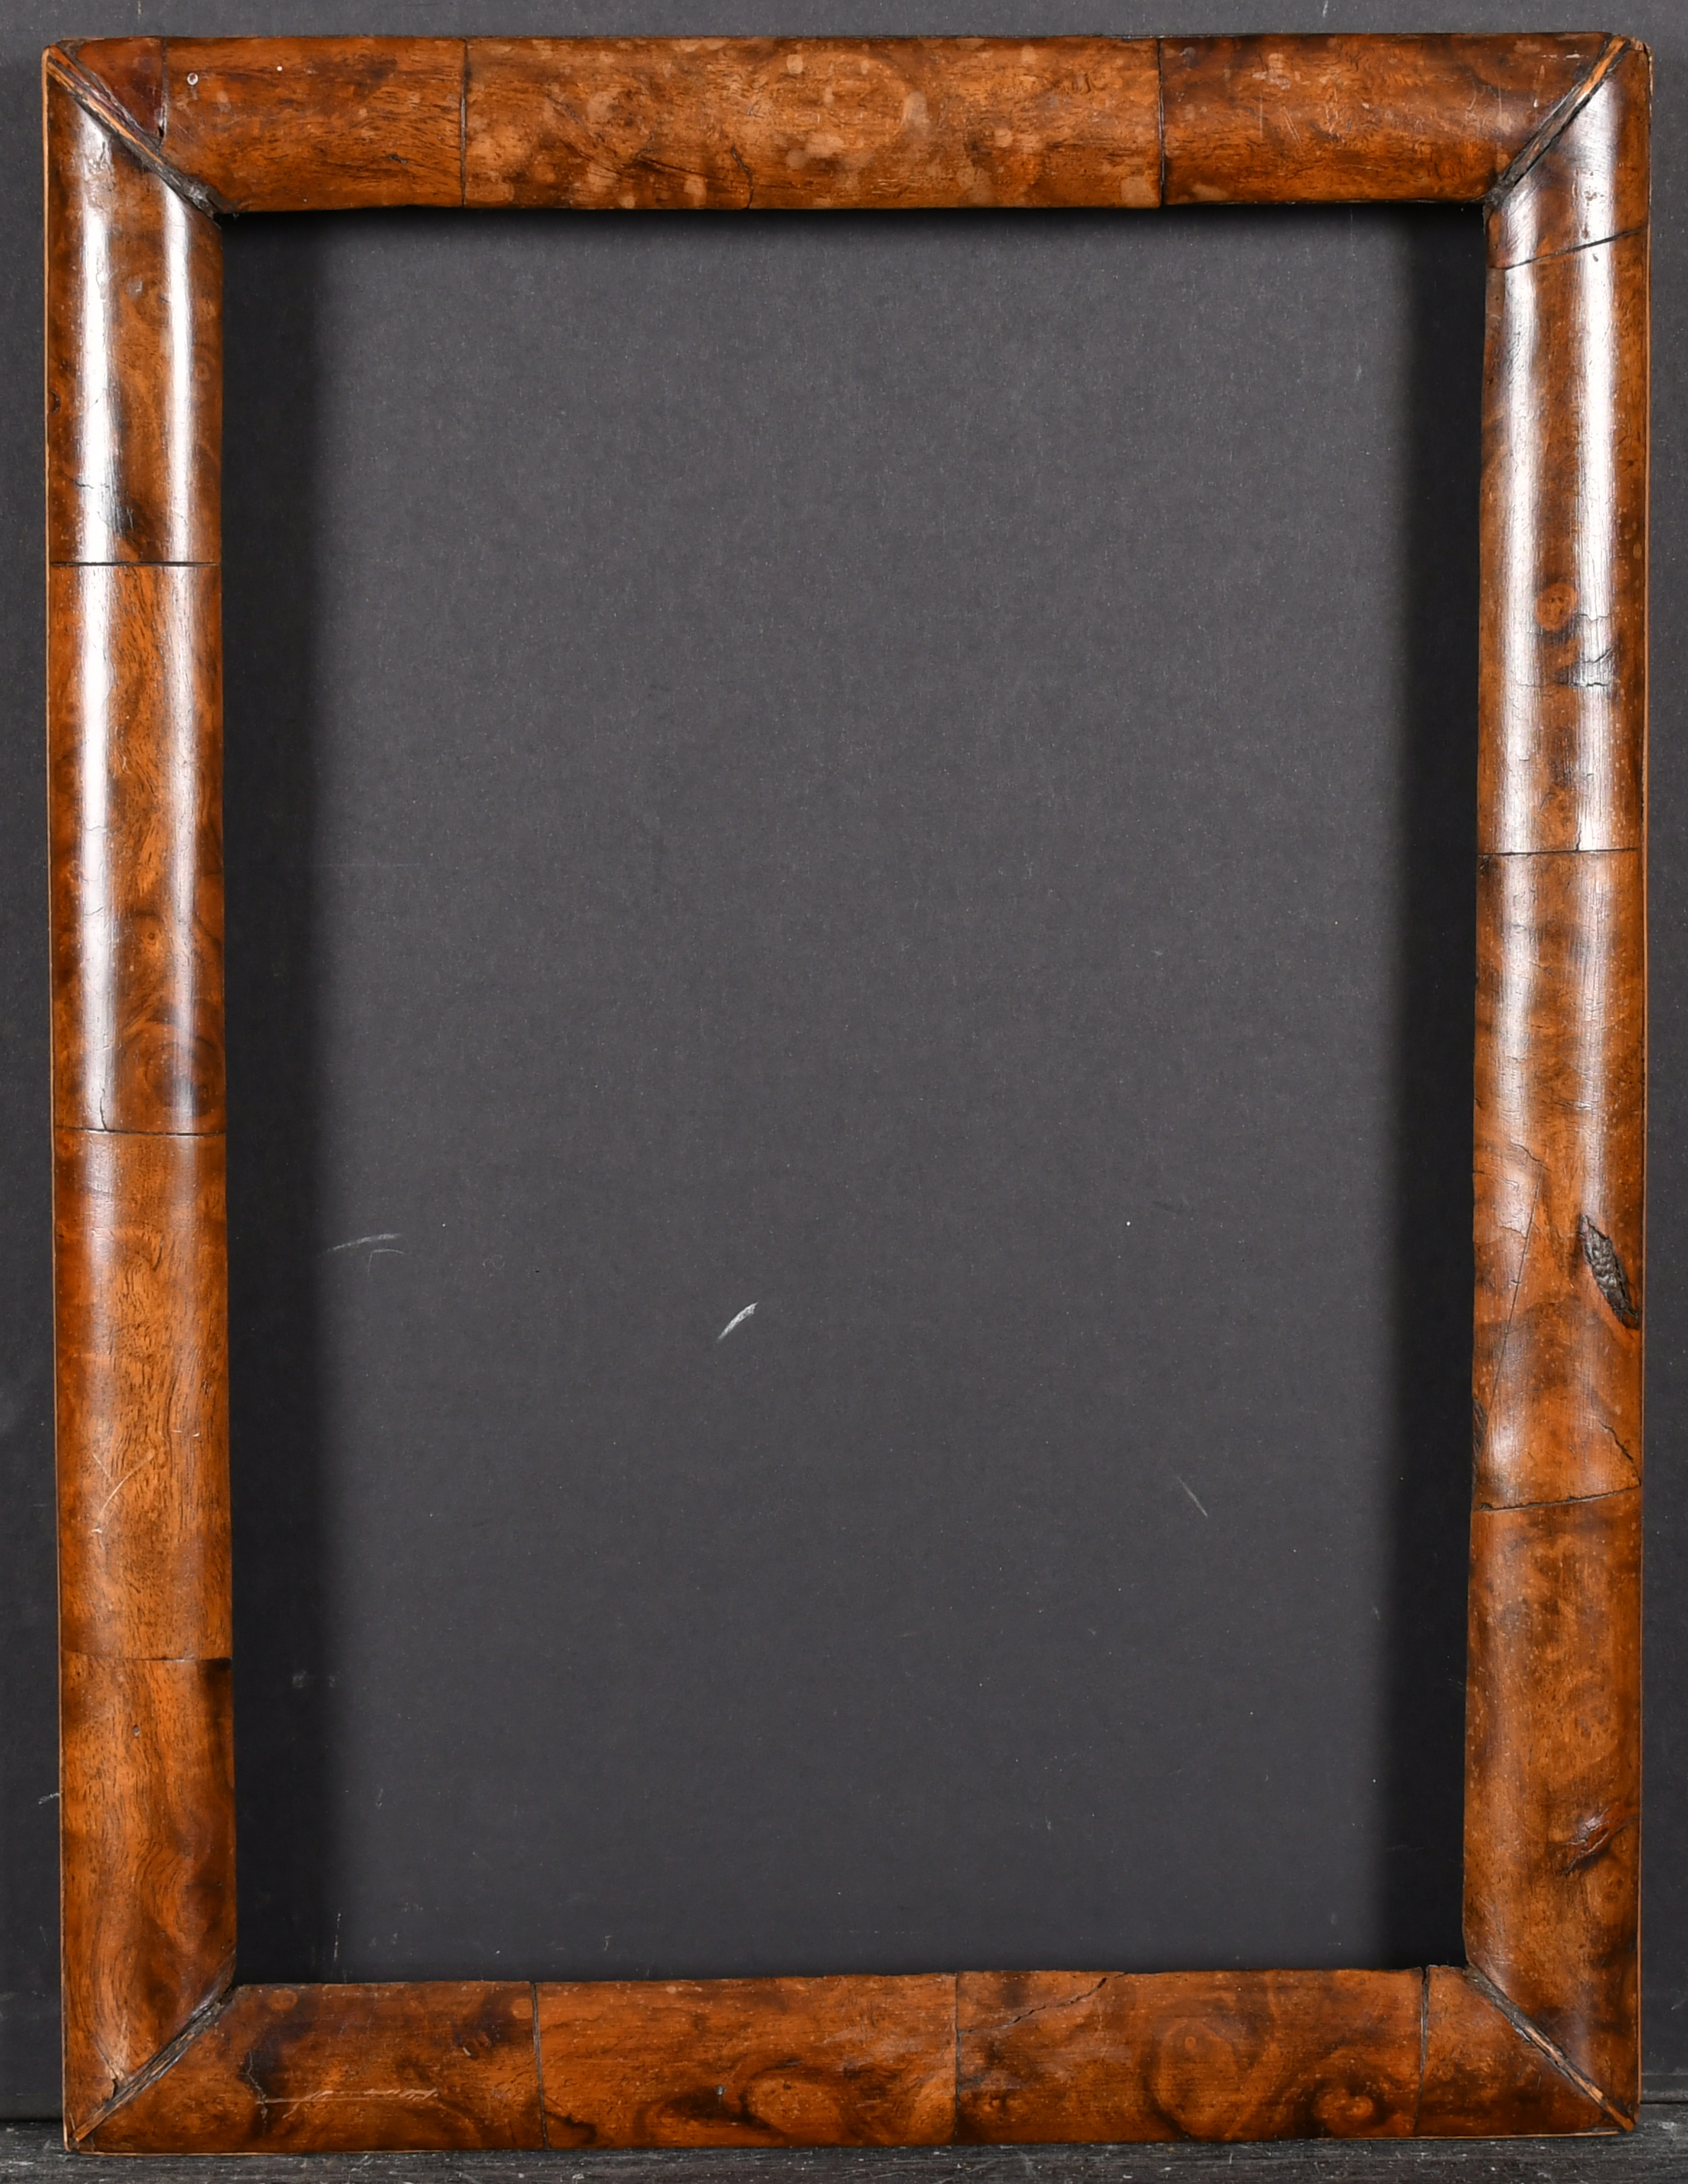 18th Century English School. A Wooden Frame, rebate 14.25" x 10.25" (36.2 x 26cm) - Image 2 of 3